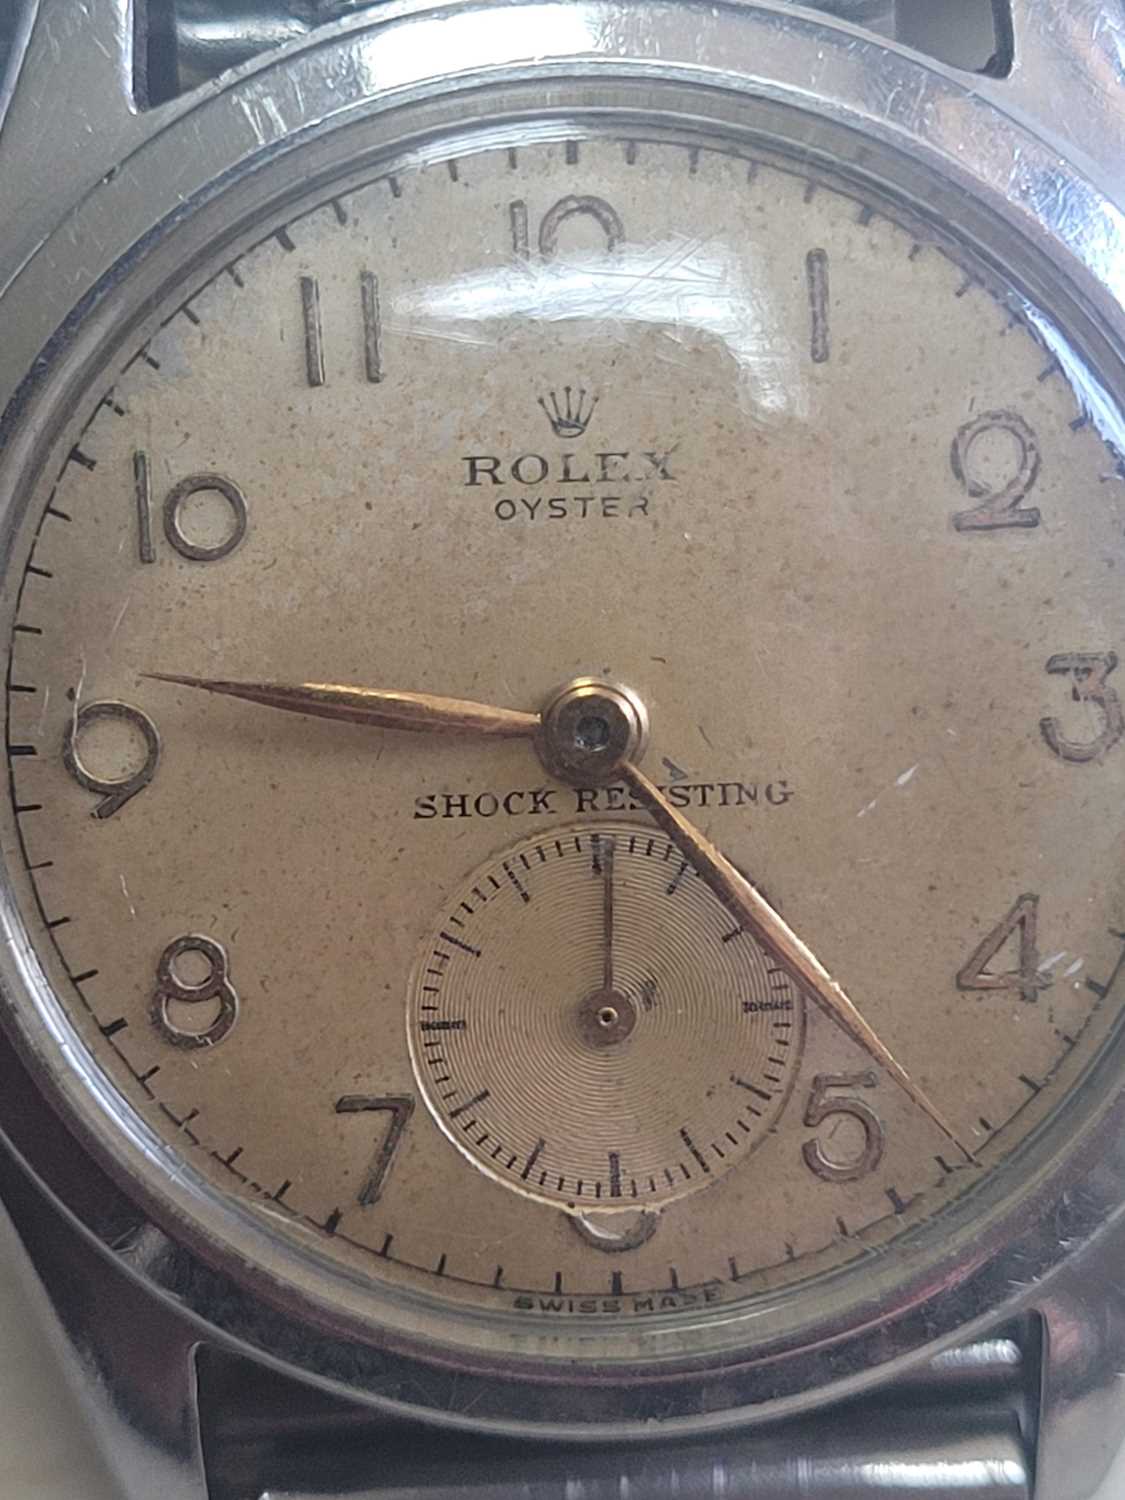 A gentlemen's stainless steel Rolex oyster mechanical watch, c.1946, - Image 5 of 7